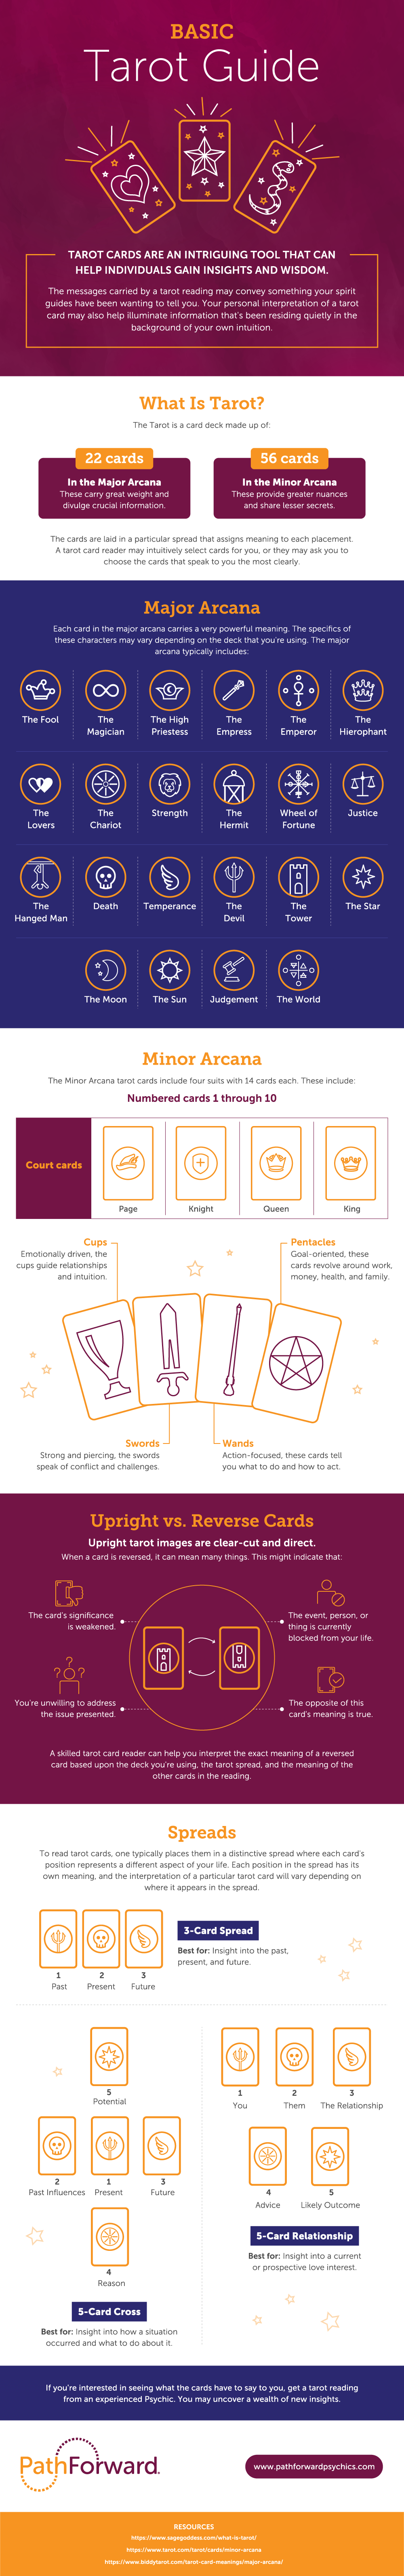 Use our free three card tarot reading to answer questions about your past, present, and future.  The 3 card tarot gives you a quick read on obstacles and outcomes.